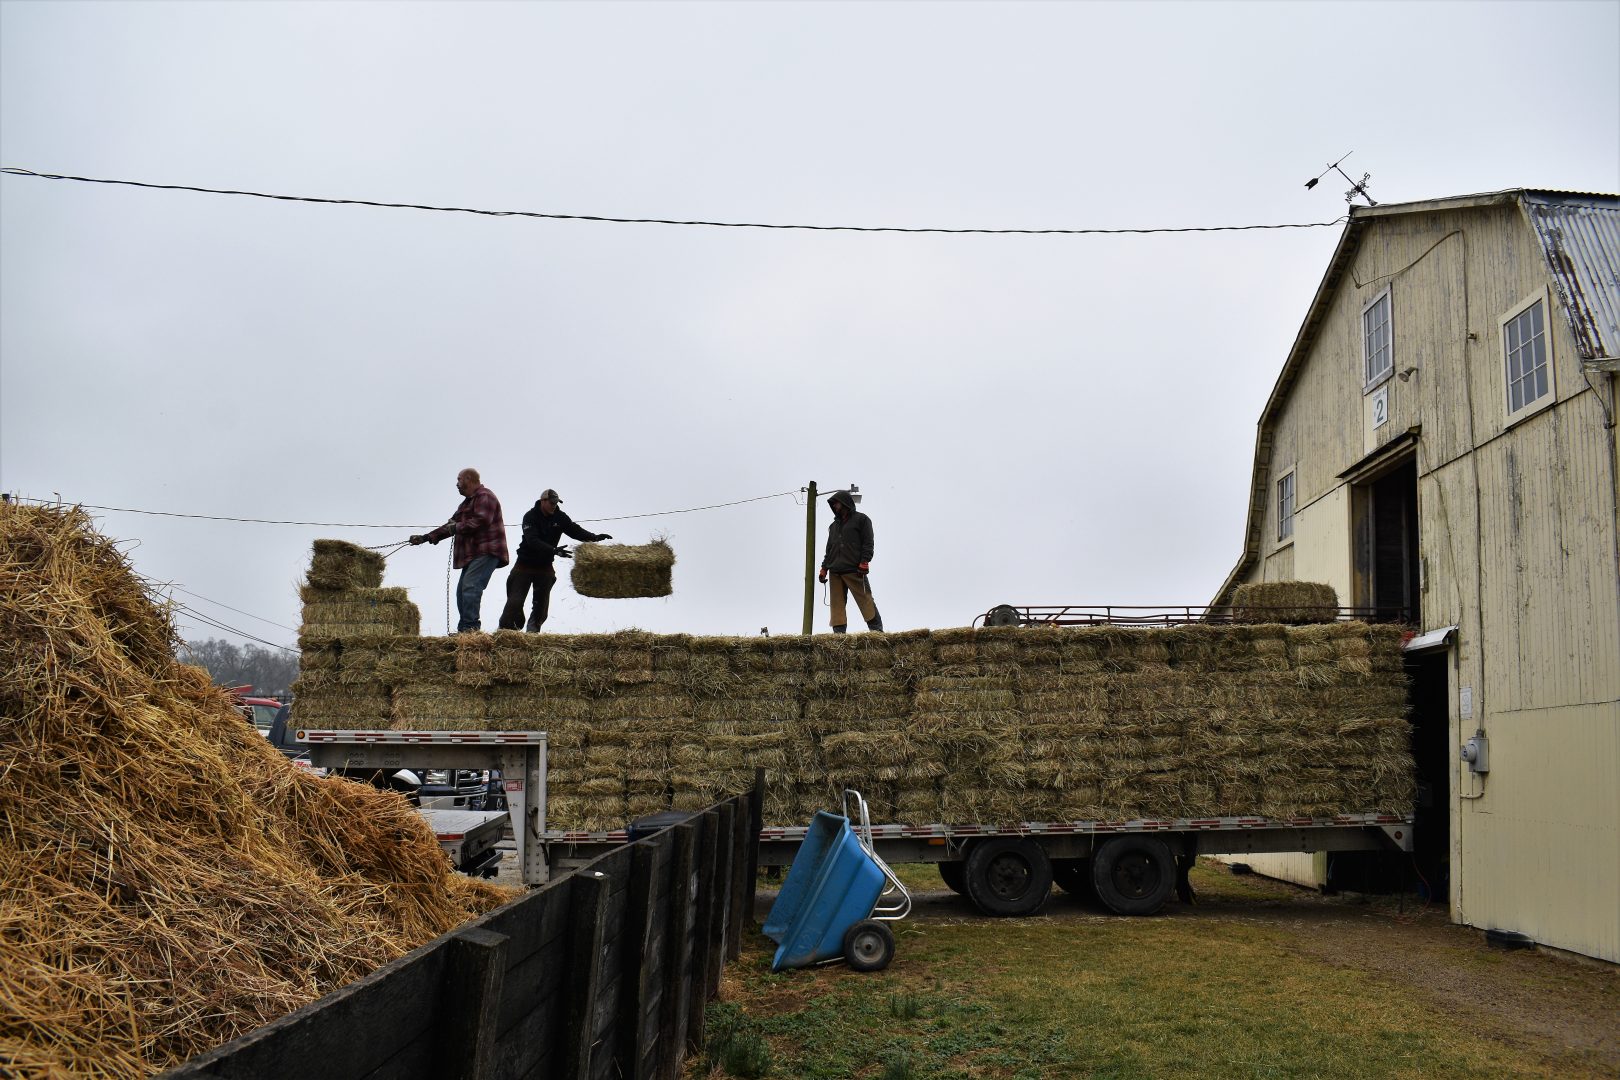 Workers unload hay at Hanover Shoe Farms in Adams County on Feb. 11, 2020.